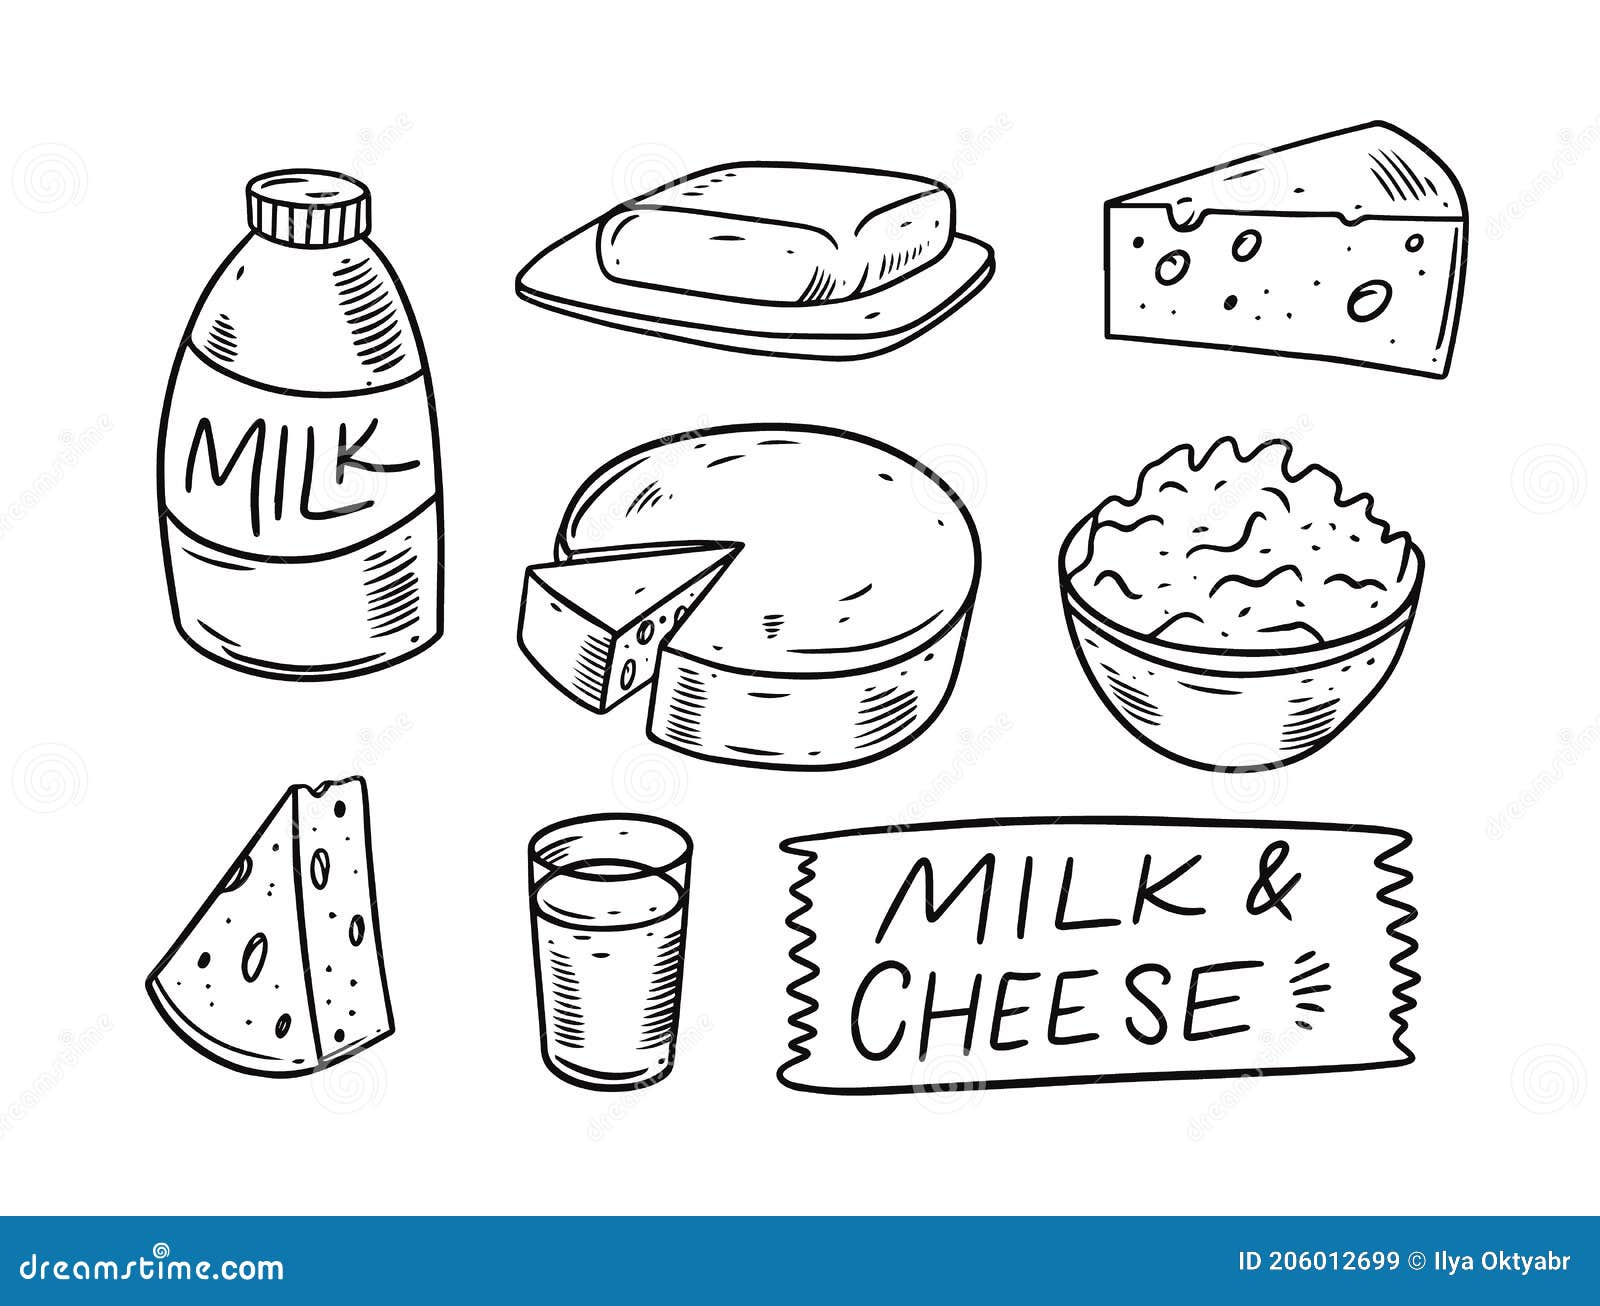 Dairy Products Drawing: Over 22,370 Royalty-Free Licensable Stock Vectors &  Vector Art | Shutterstock